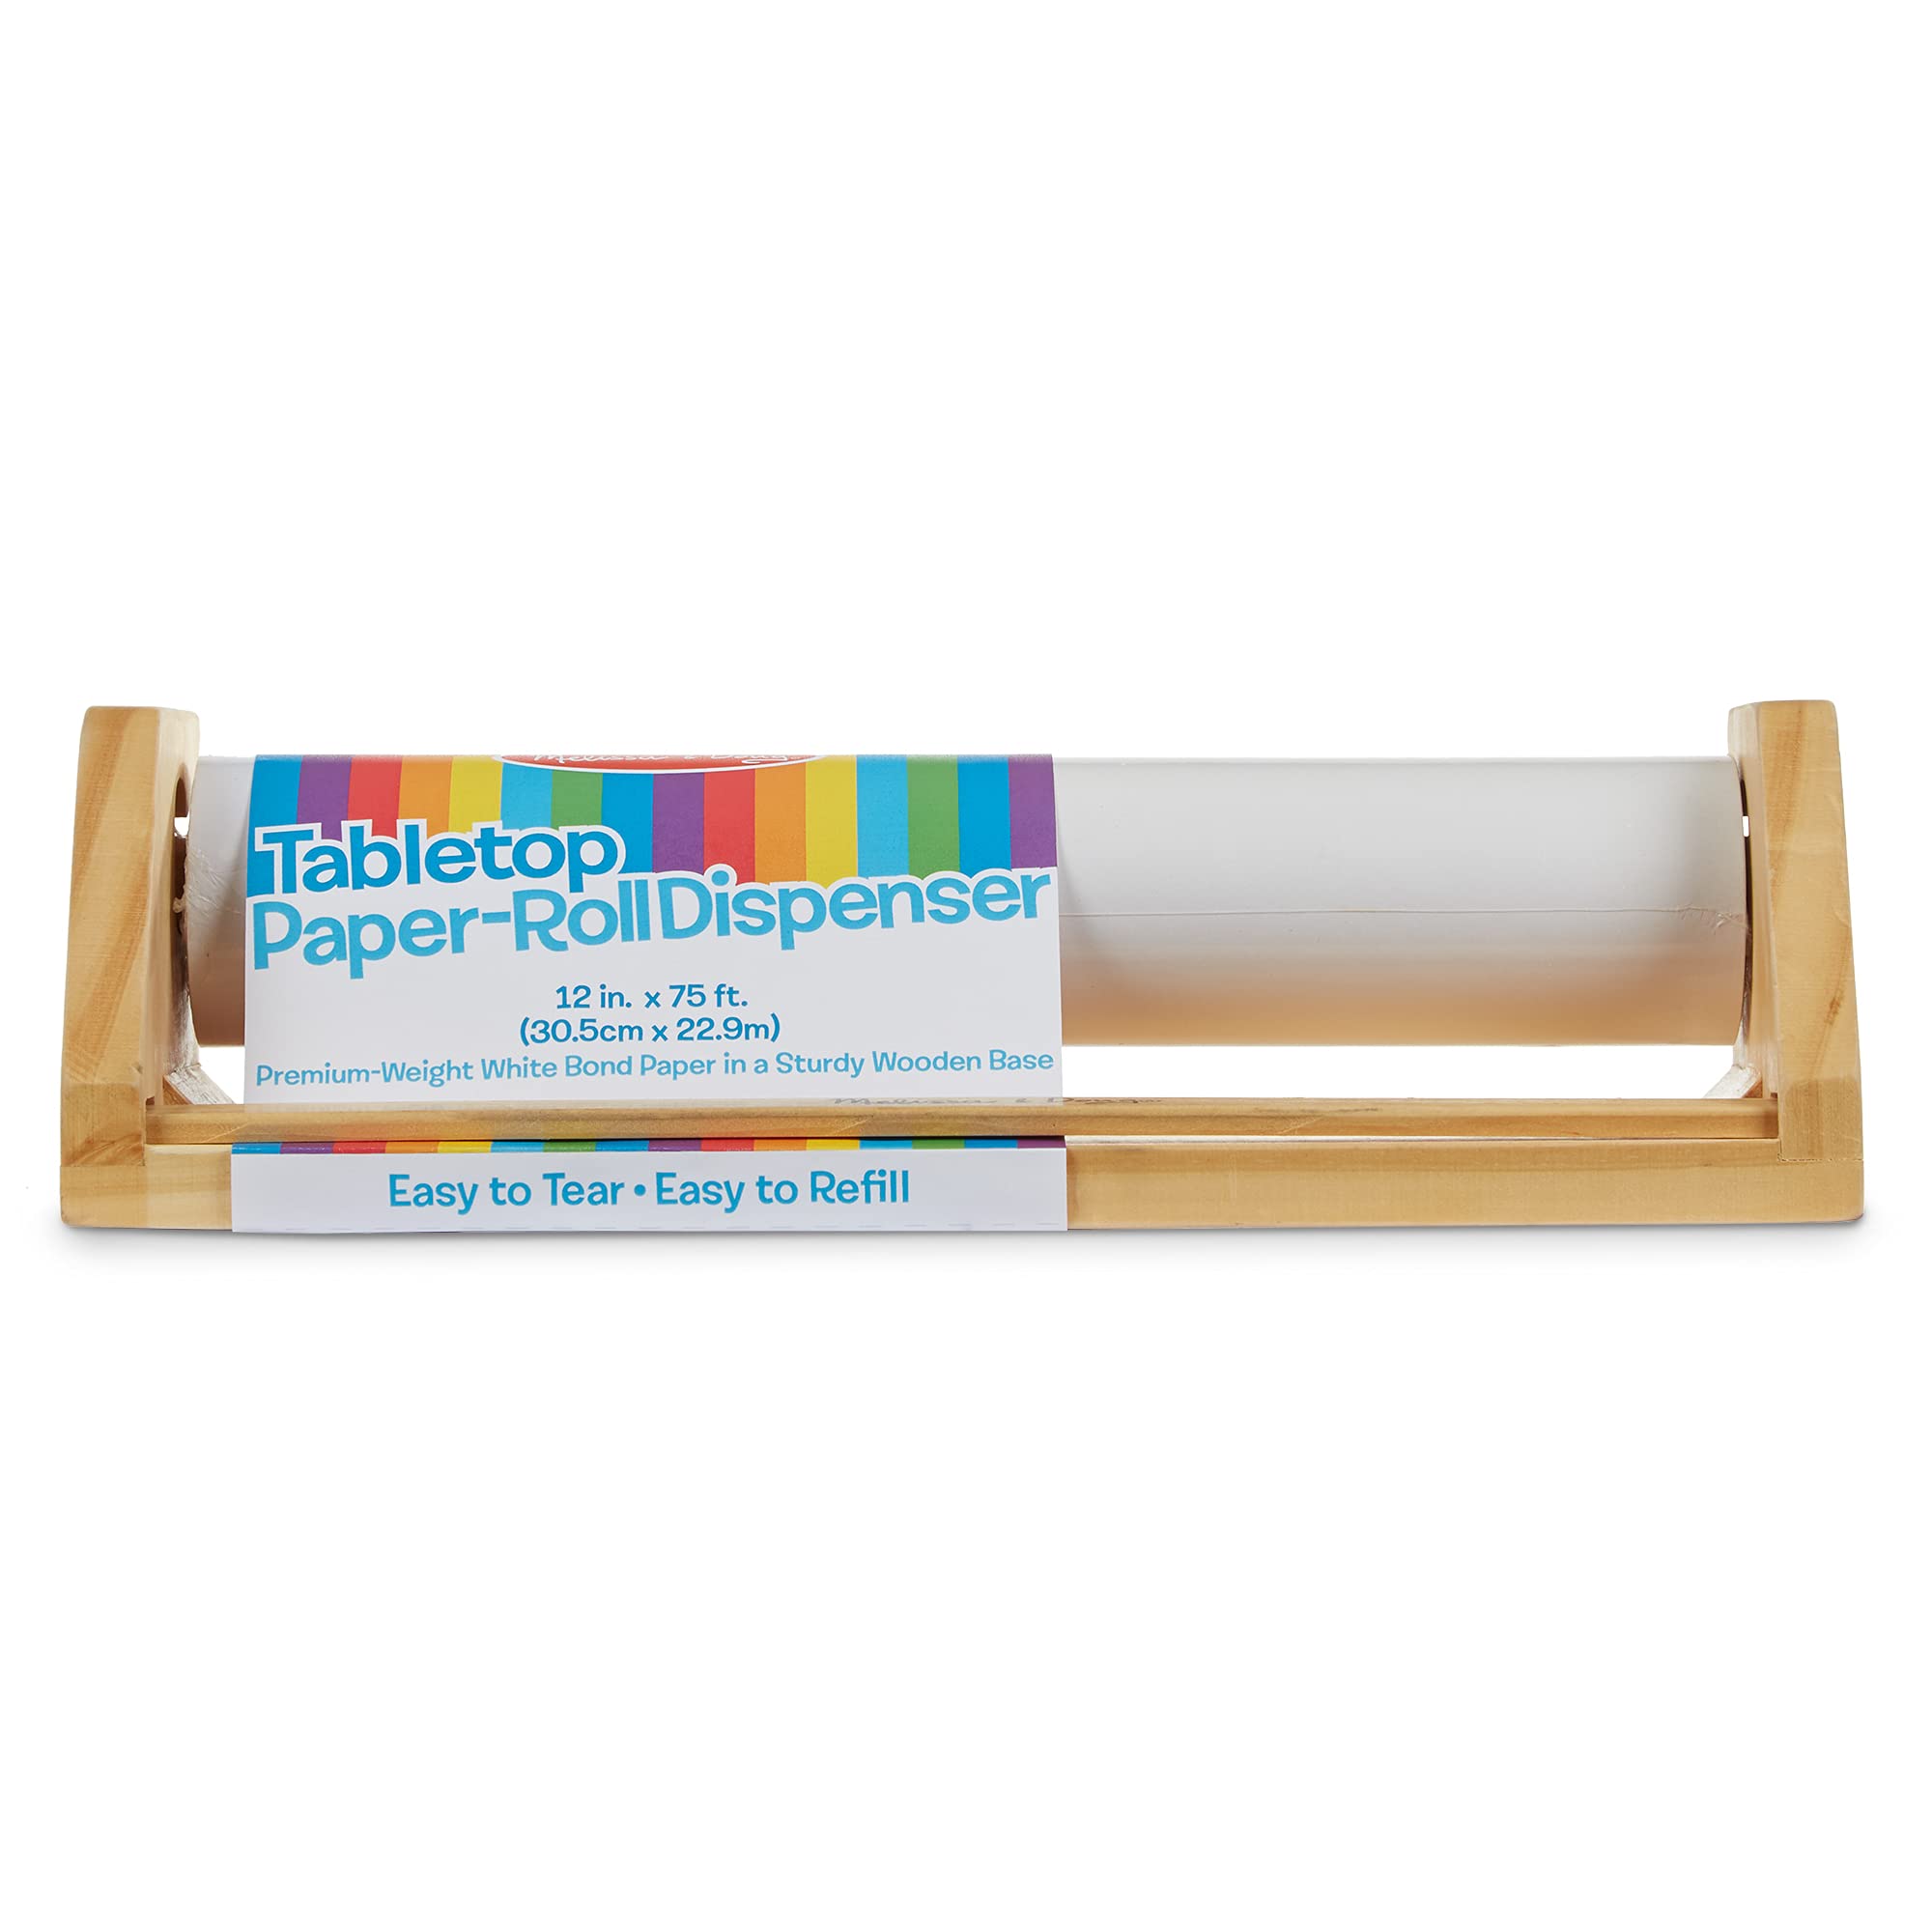 Melissa & Doug Wooden Tabletop Paper Roll Dispenser With White Bond Paper (12 inches x 75 feet) - Drawing, Art, Craft Paper Roll For Kids